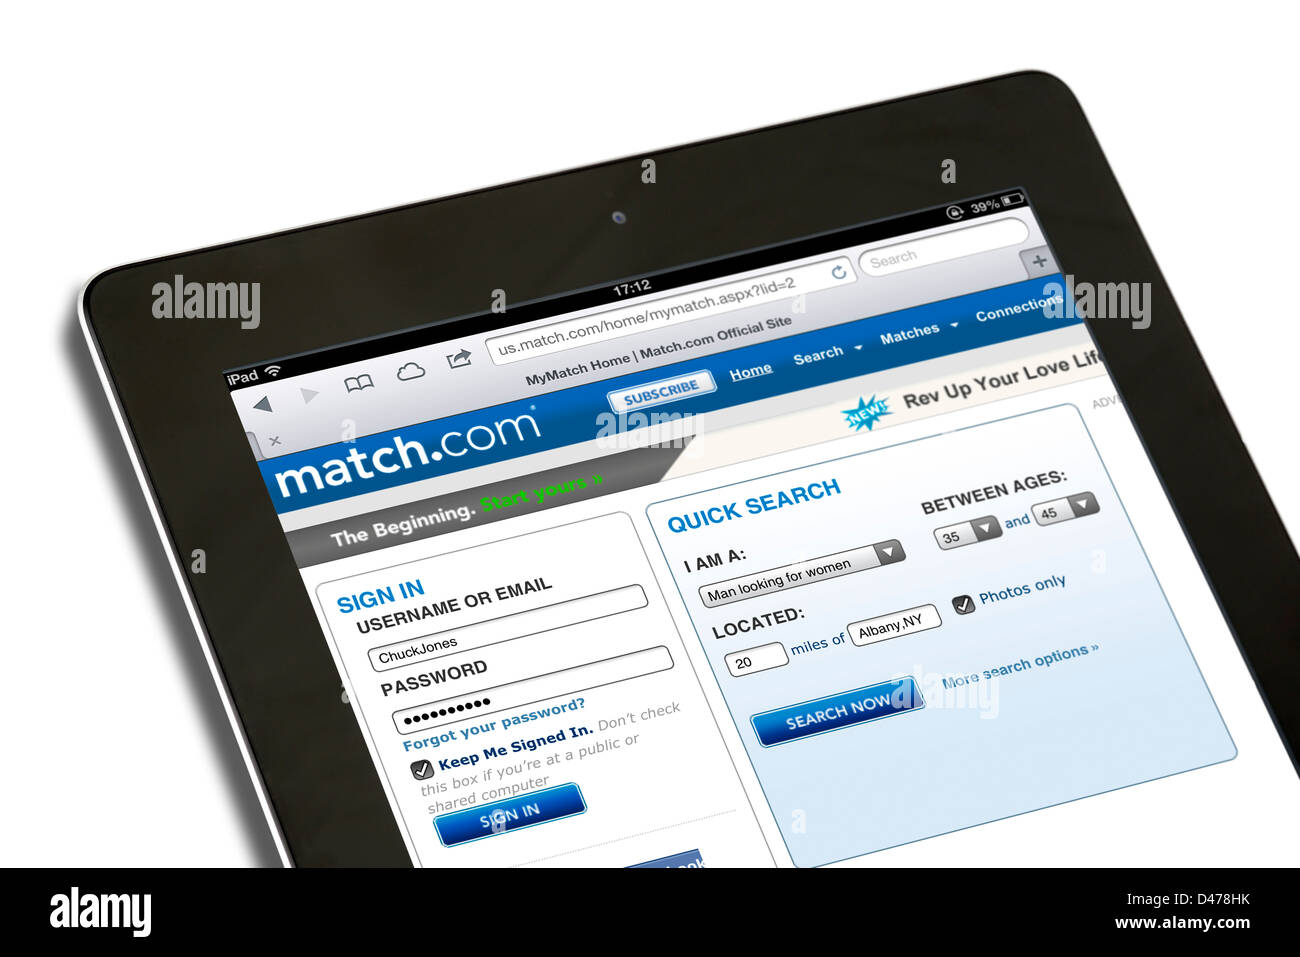 The online dating site match.com viewed in the USA on a 4th generation Apple iPad, USA Stock Photo